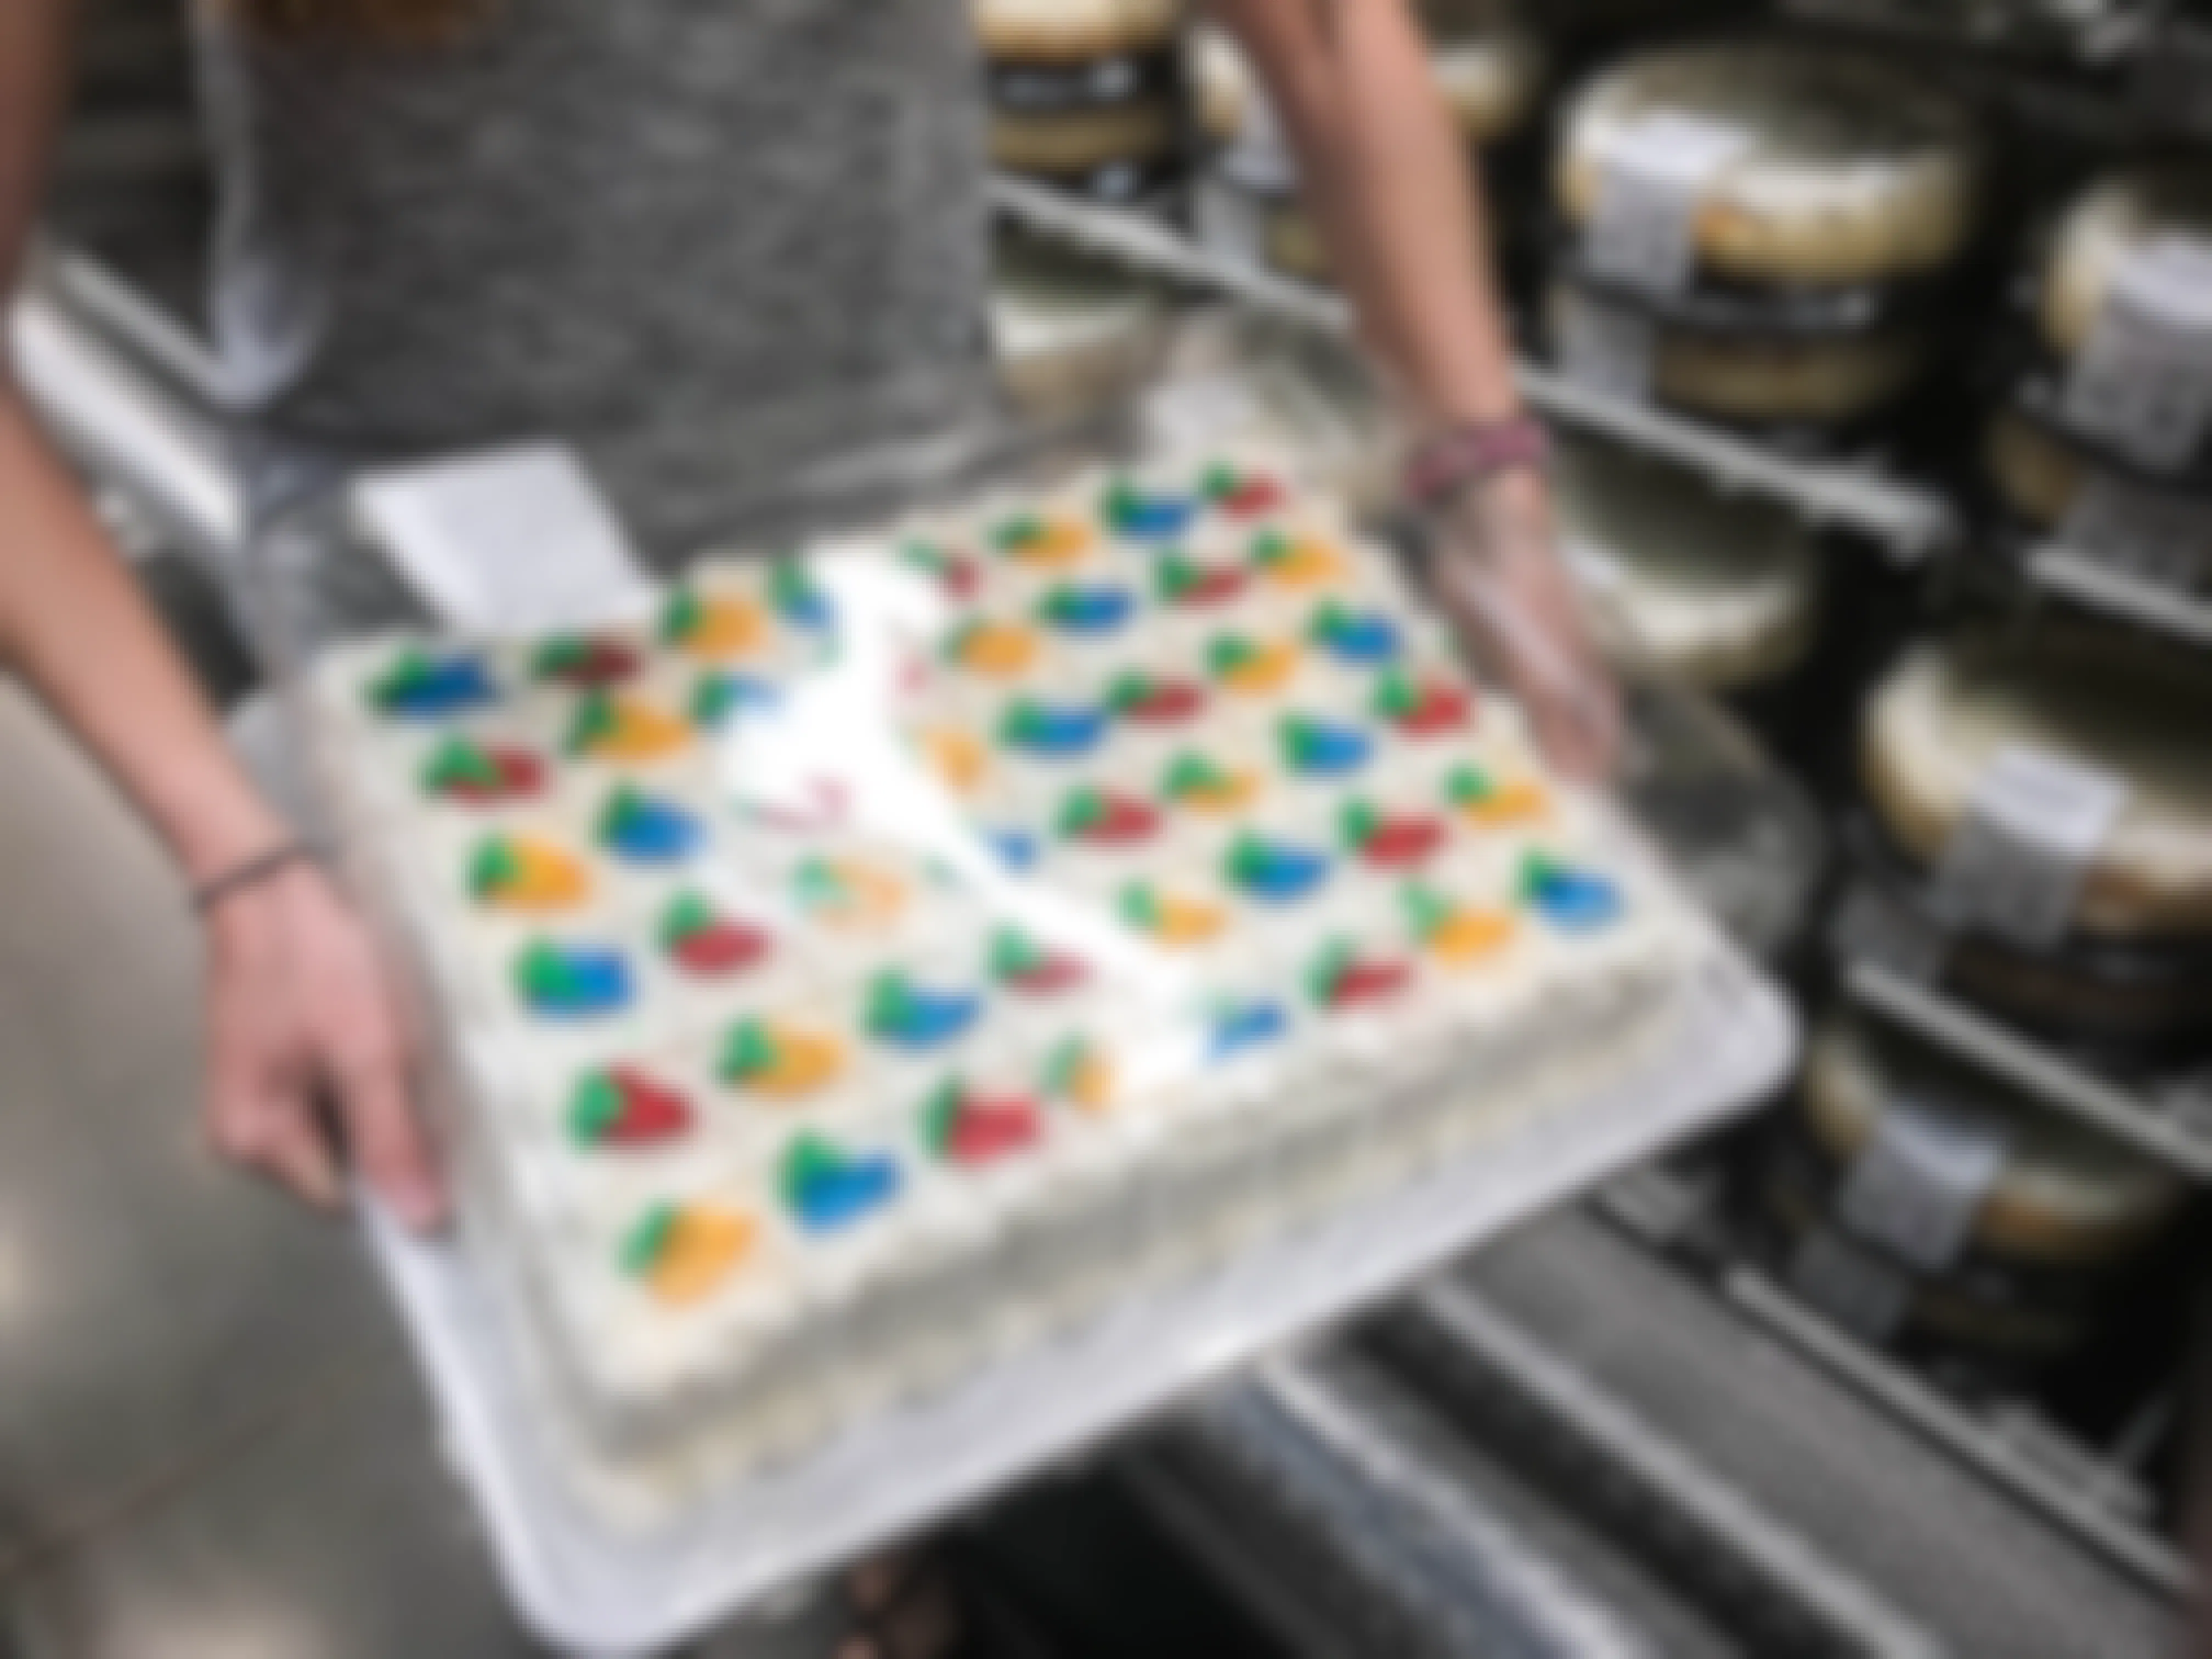 Costco Half-Sheet Cakes Aren't On Shelves (But You Can Still Get Them)